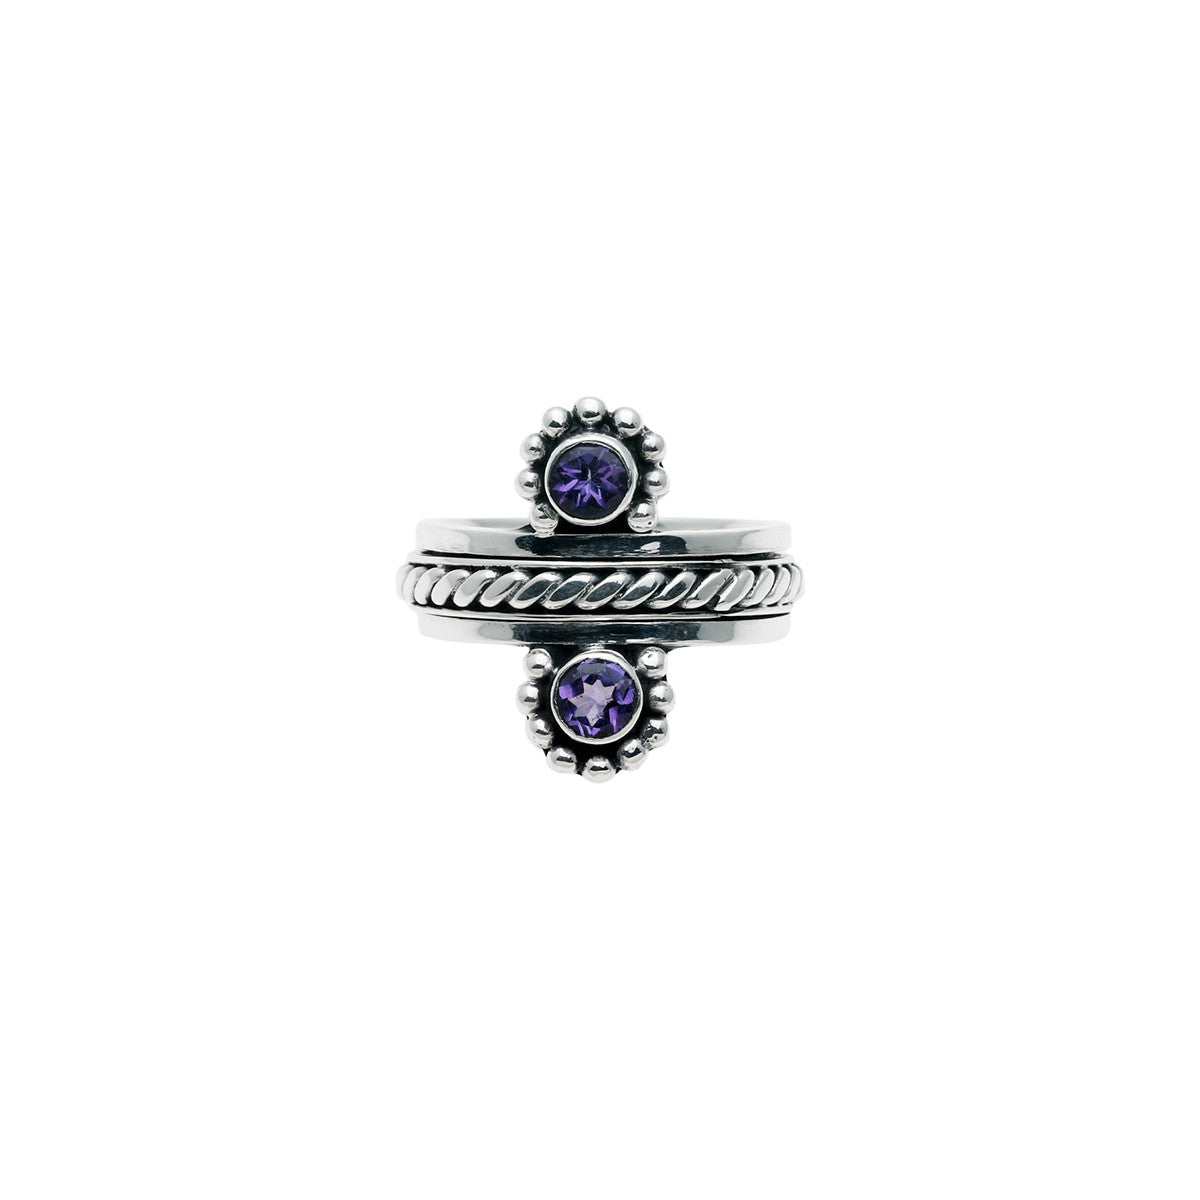 Moon Reflection Sterling Silver Amethyst Spin Ring - Cynthia Gale New York Jewelry